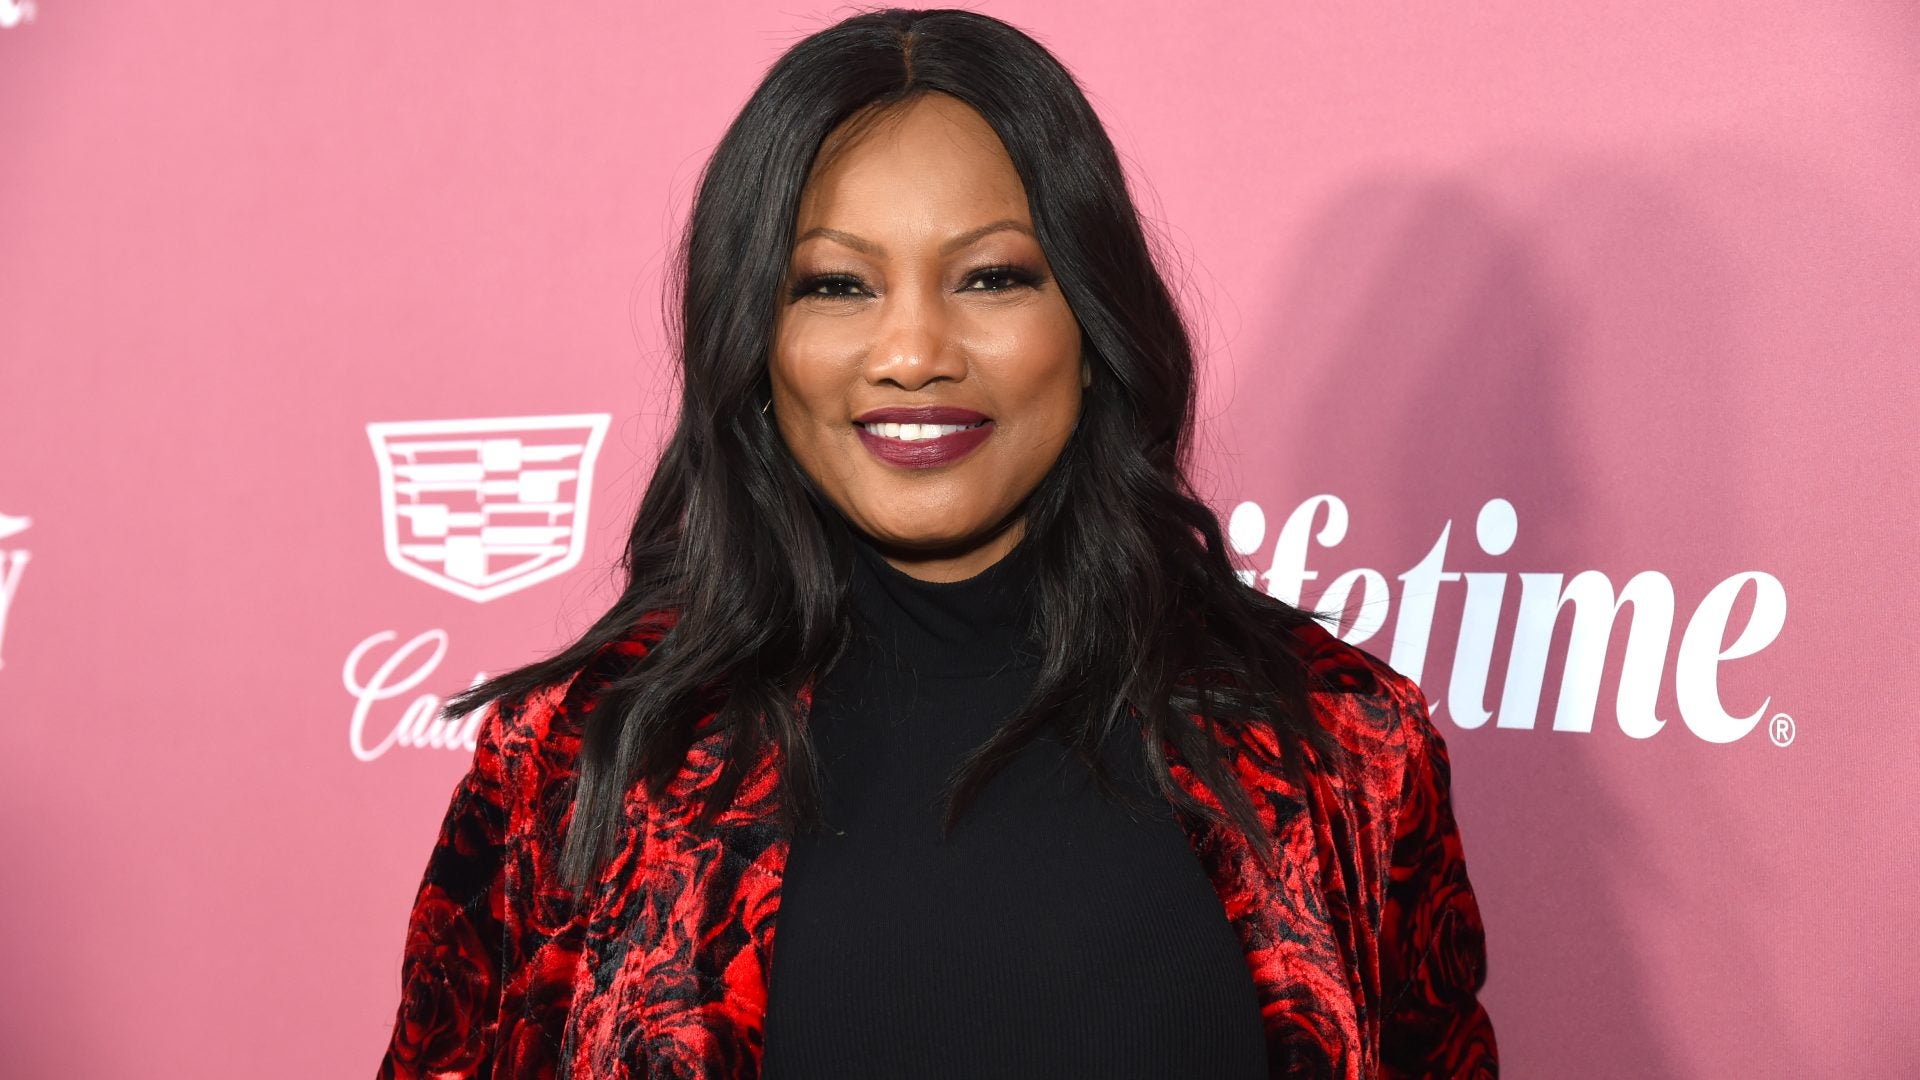 Garcelle Beauvais Opens Up About Past Challenges With Fibroids And Infertility